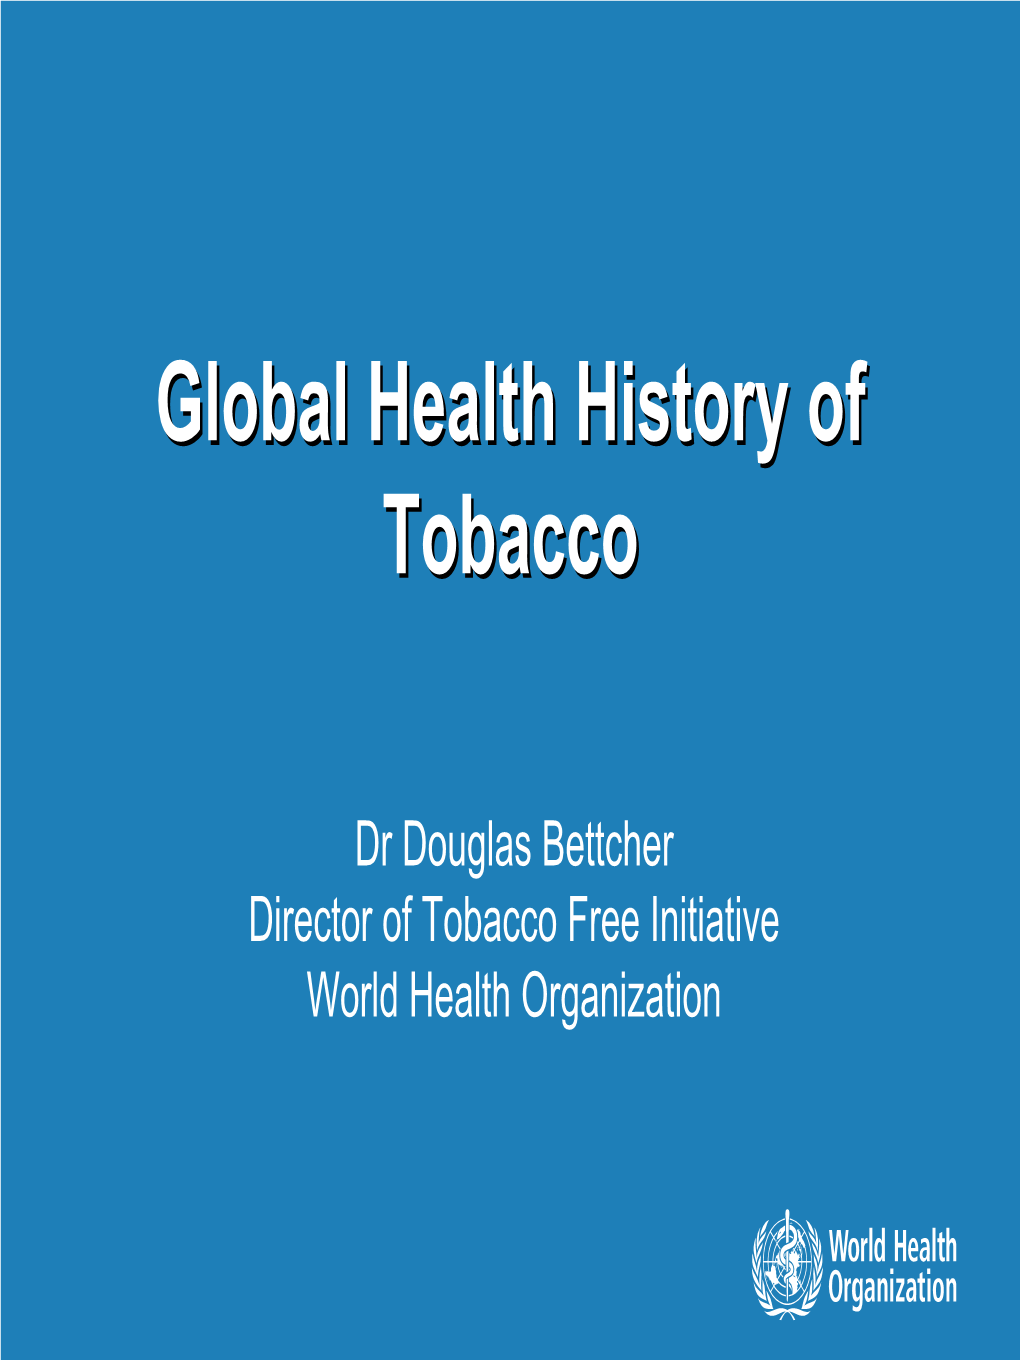 The Tobacco Industry Research Council to Counter the Growing Health Concerns